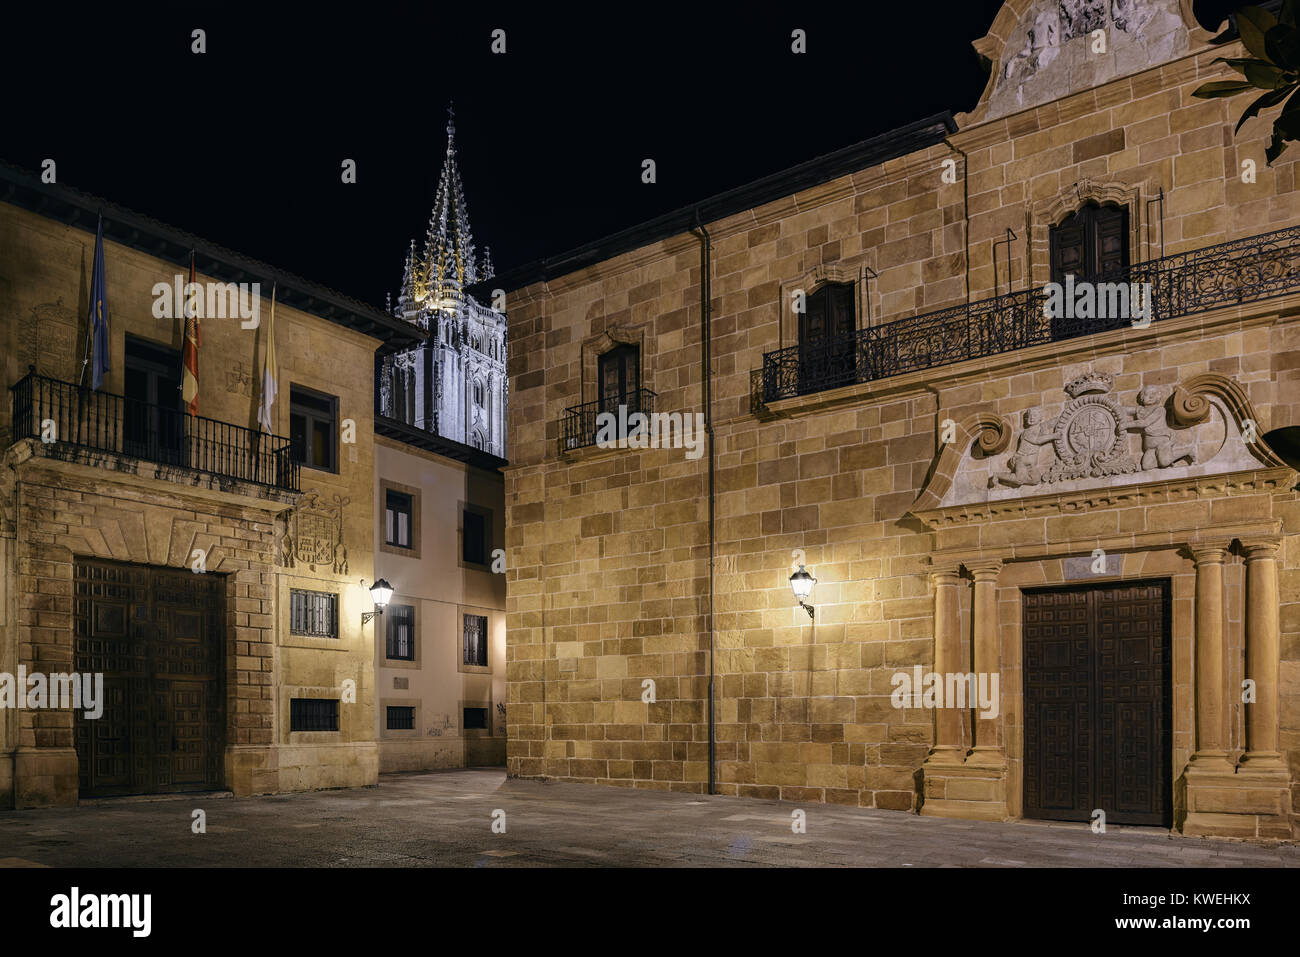 Plaza corrada del bishop, archbishopric, tower and facade of the entrance to the cloister of the Cathedral of San Sebastian de Oviedo, Asturias, Spain Stock Photo